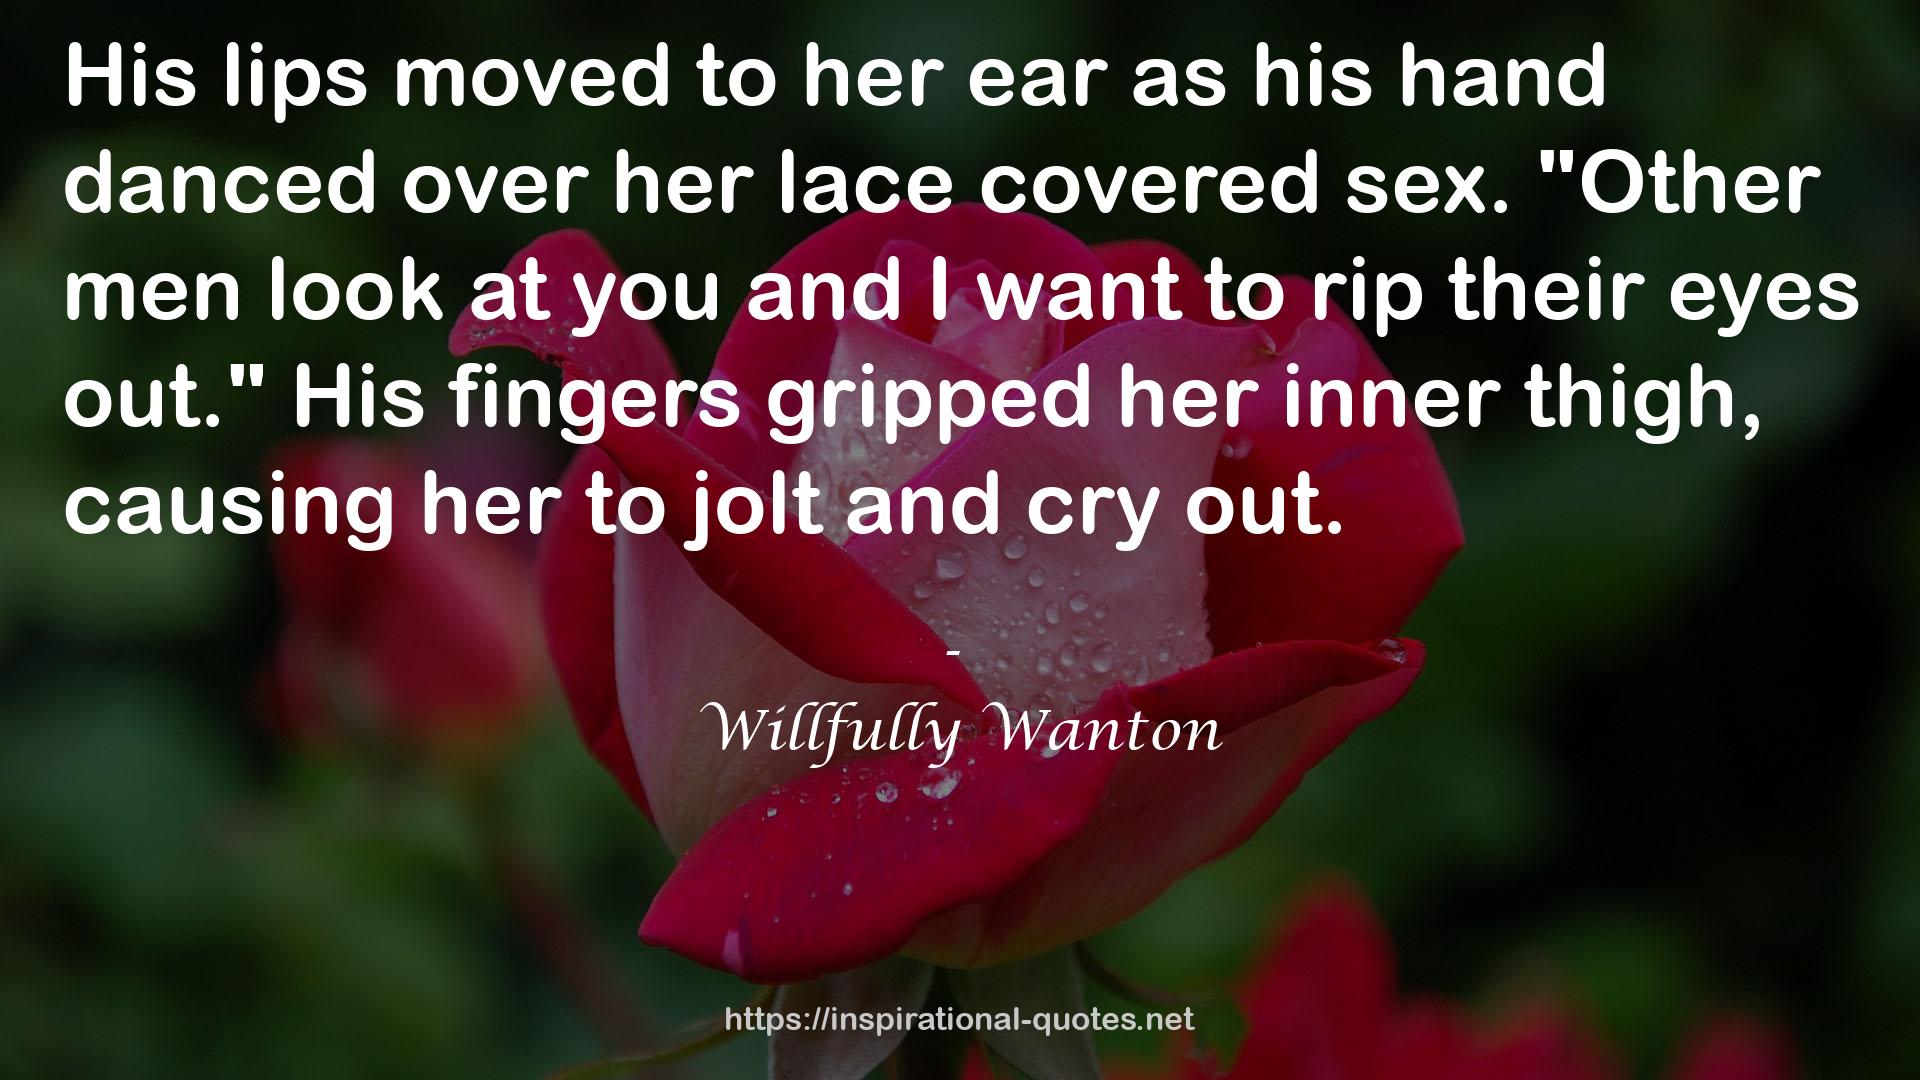 Willfully Wanton QUOTES